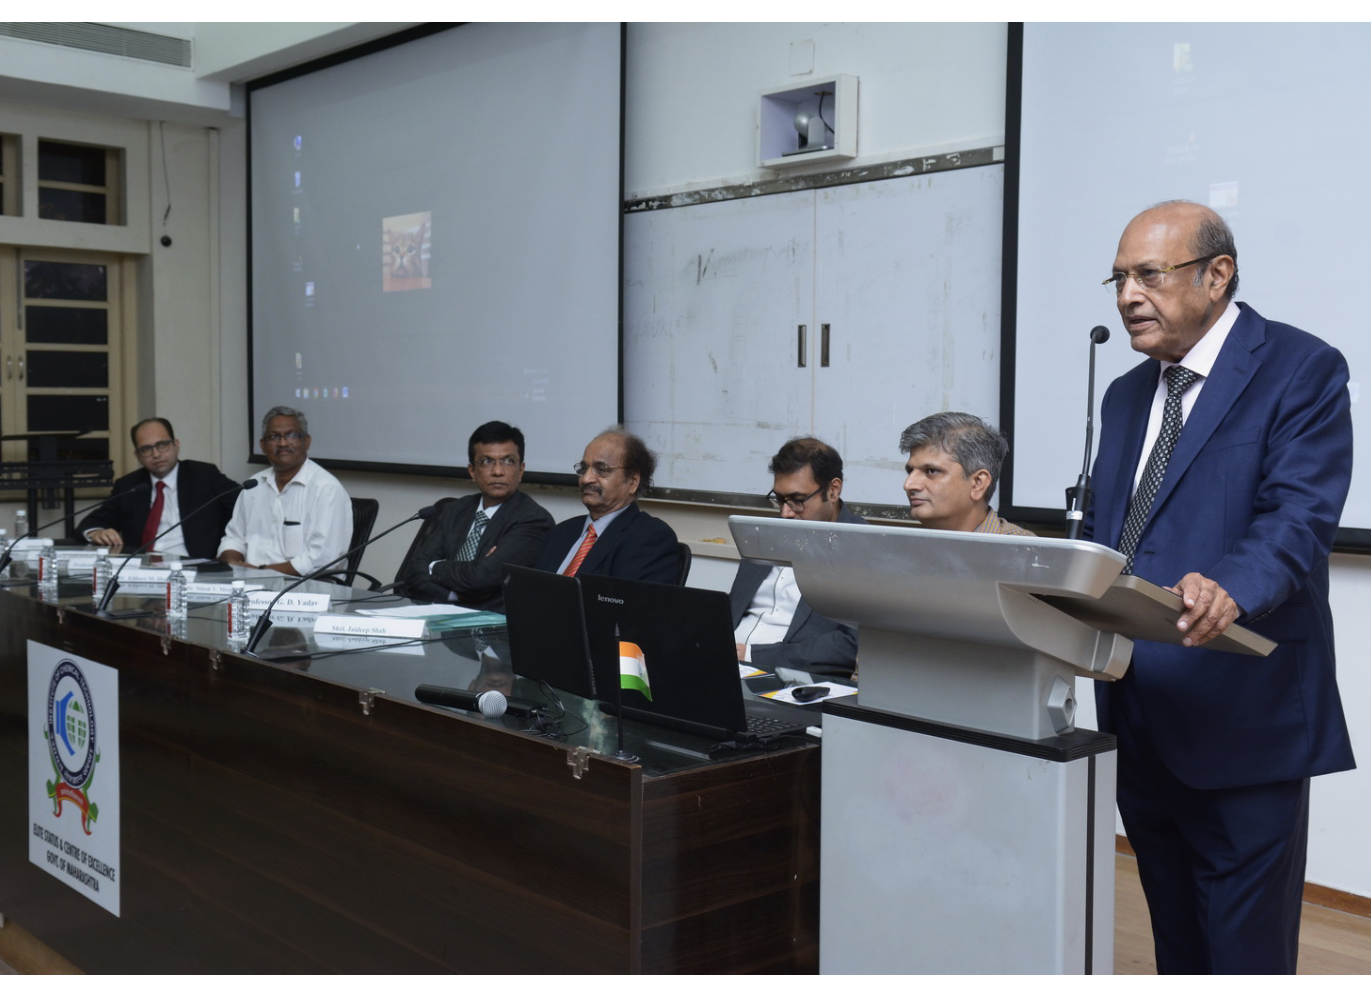 Sauradip-chemical-industries-pvt-ltd-visiting-fellowship-lecture-in-the-areas-of-dyestuff-technology